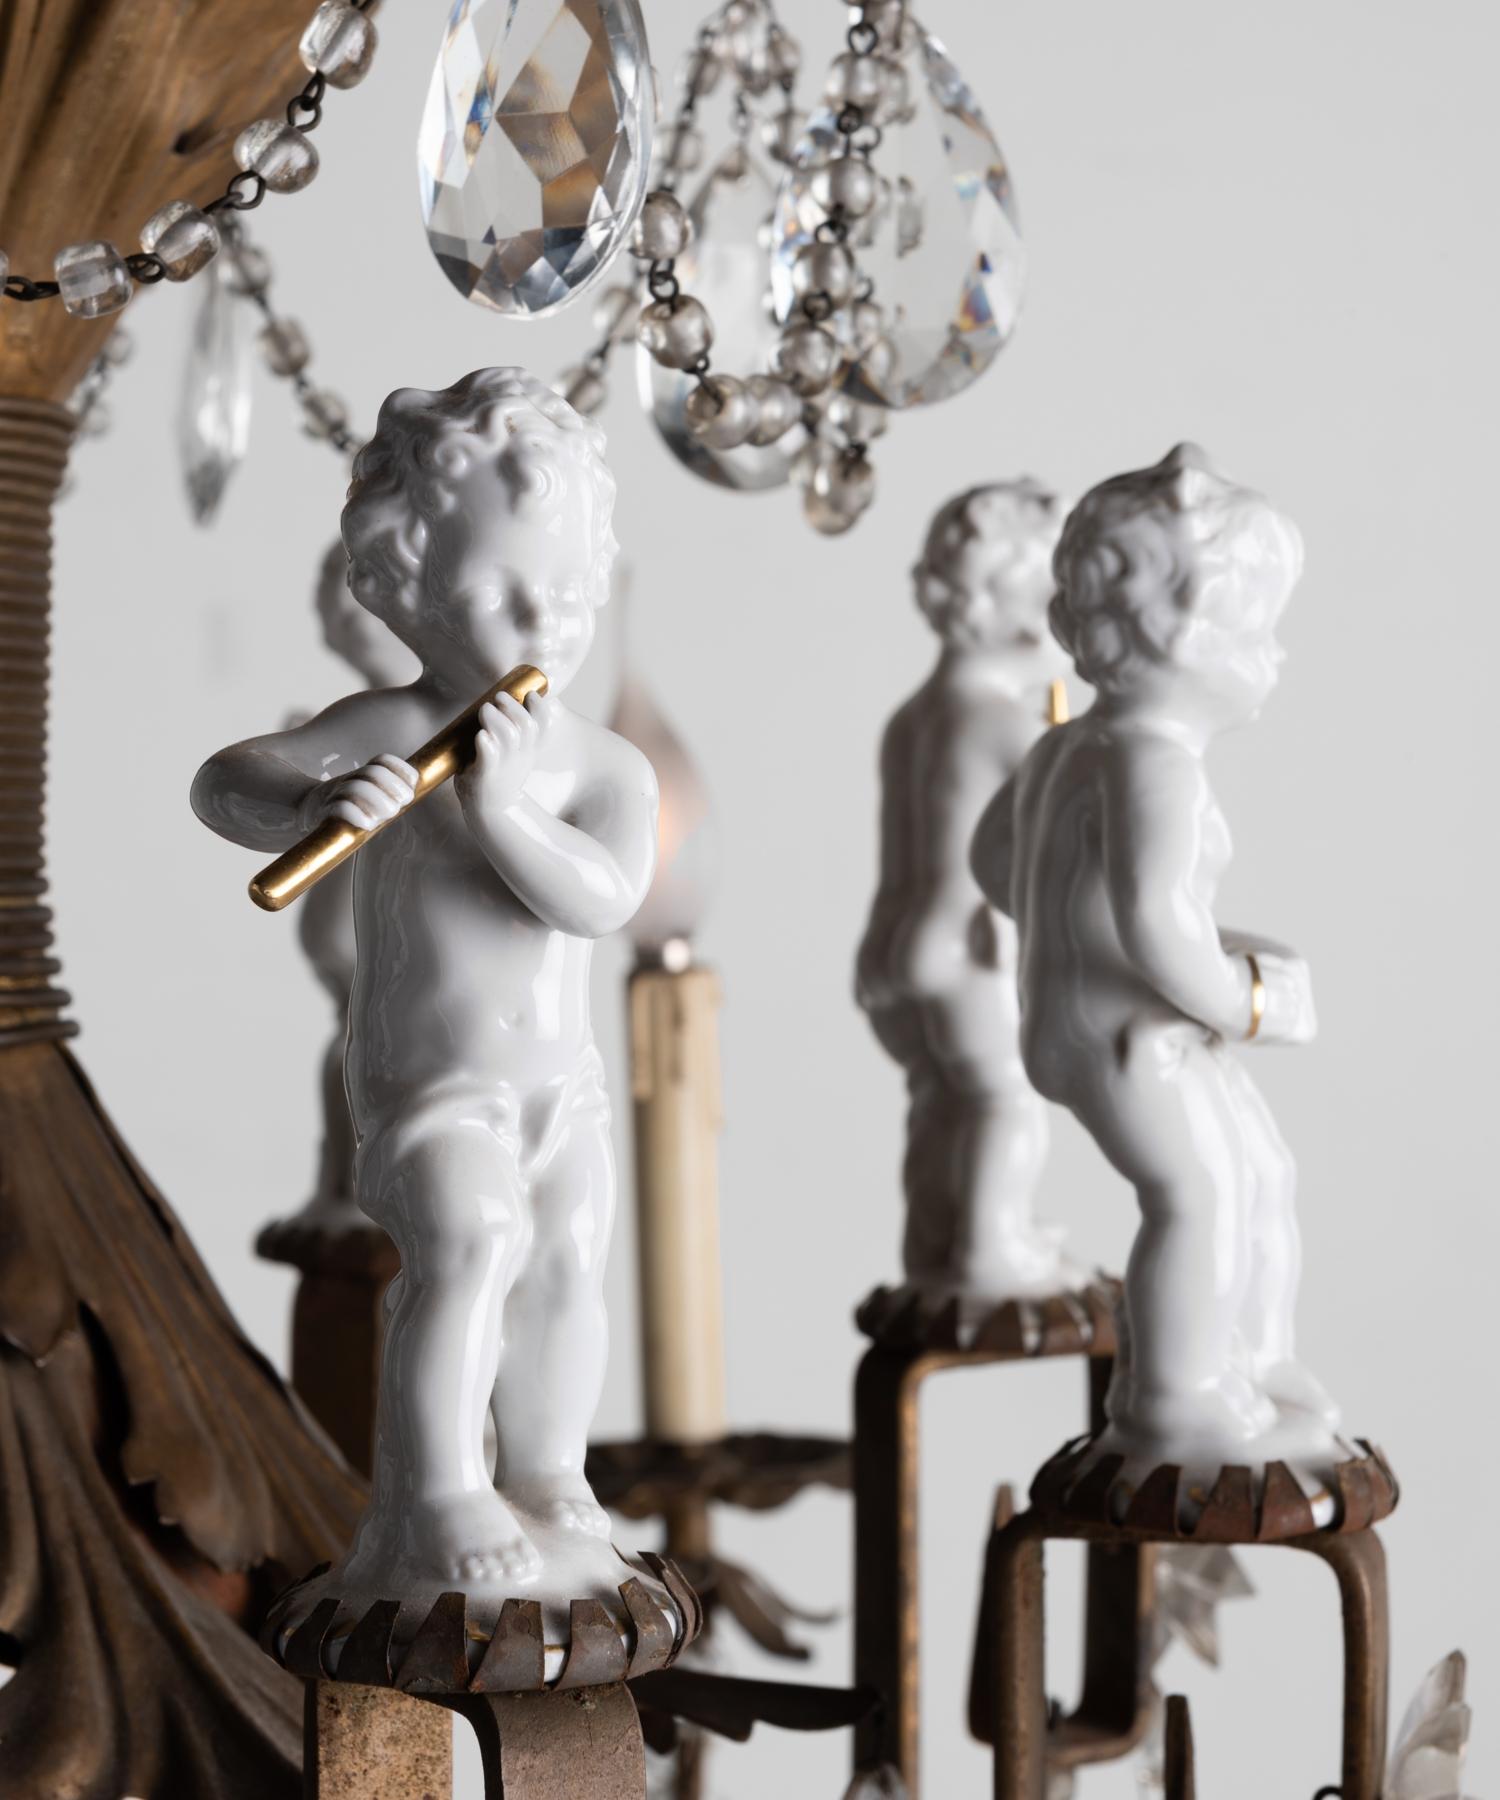 20th Century Ornate Brass Chandelier with Porcelain Figures, Italy, circa 1920